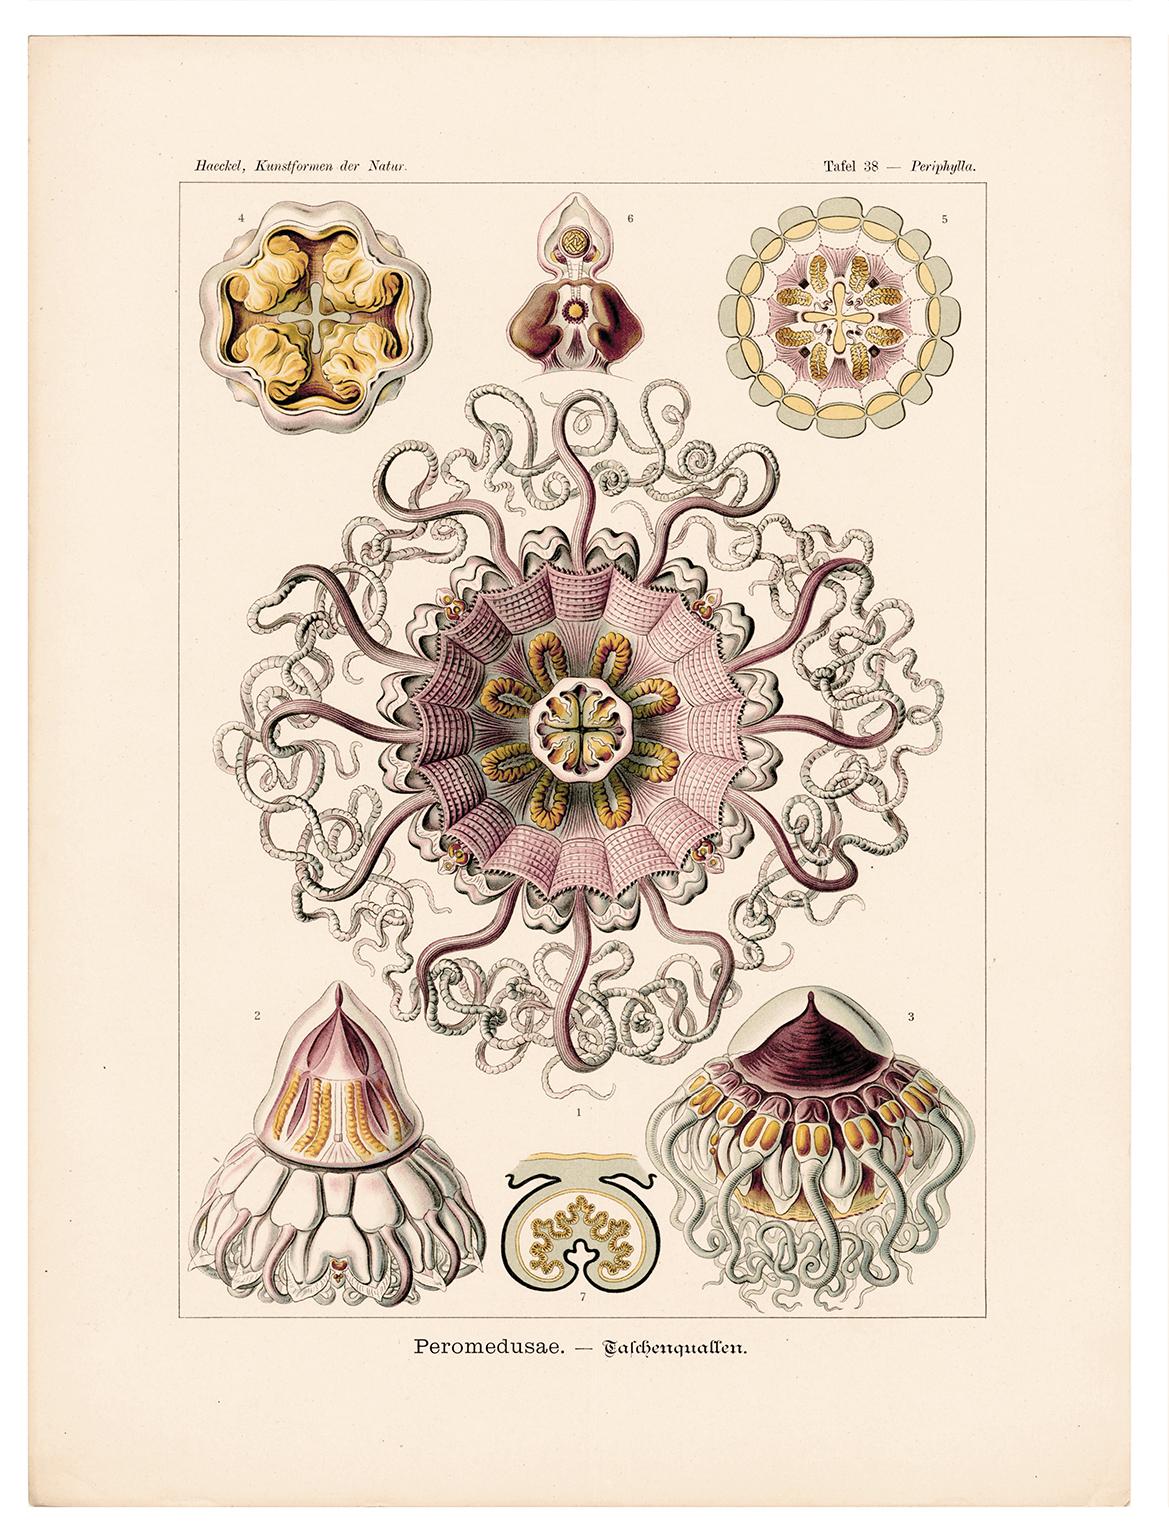 Art Forms in Nature (Plate 38 - Periphylla) — 1899 Celebration of Natural forms - Print by Ernst Haeckel